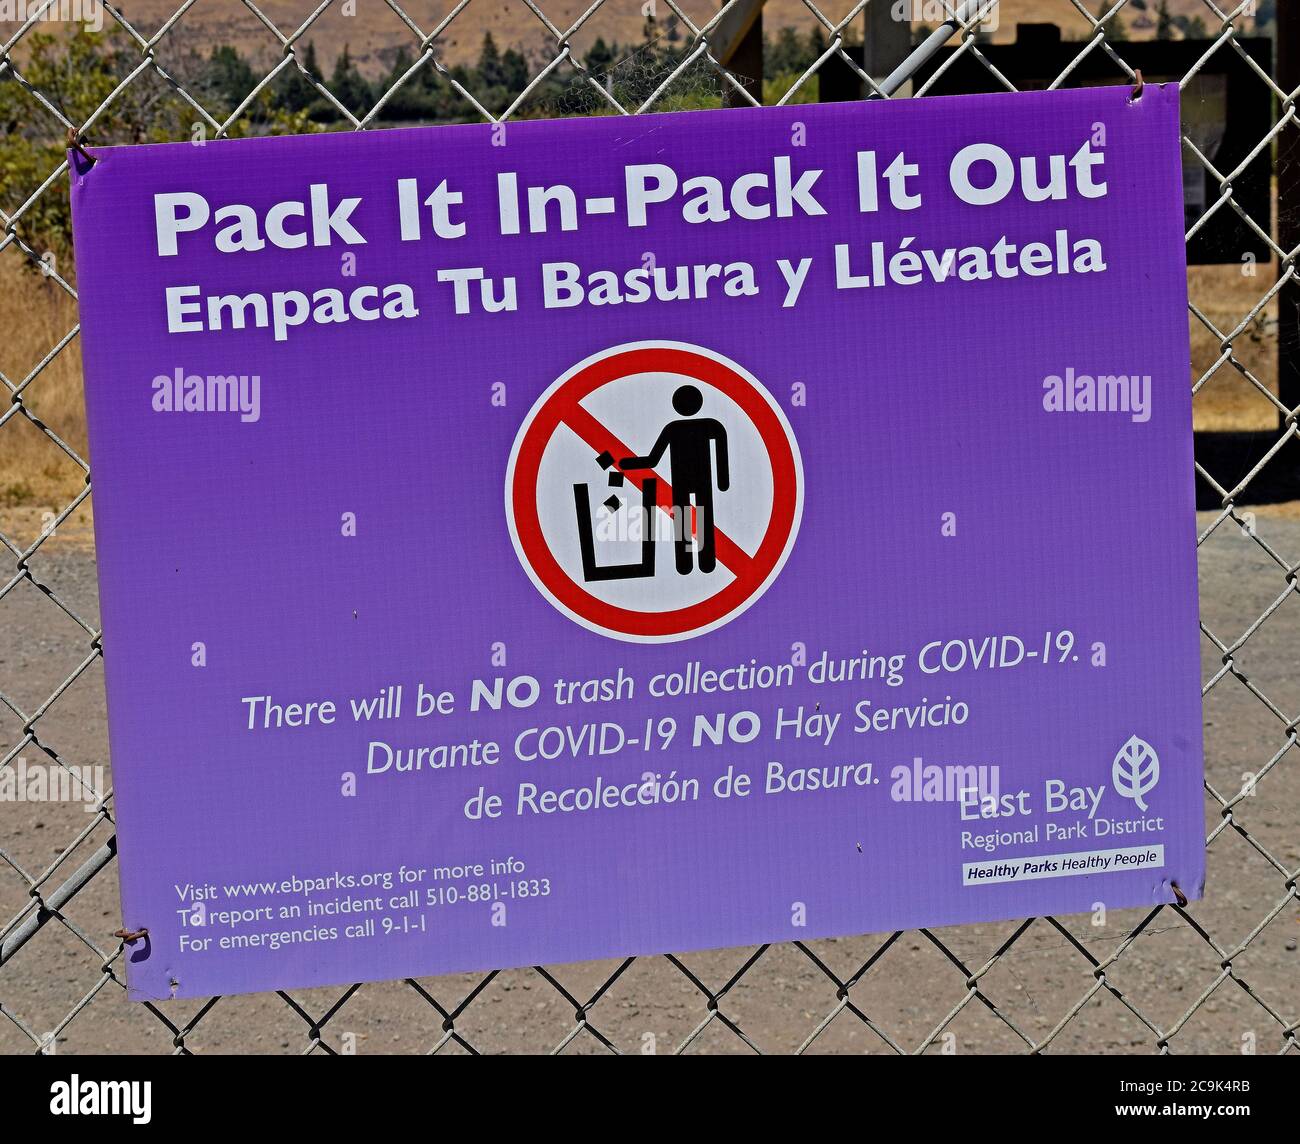 pack it in - pack it out, no trash collection during covid 19 sign in Spanish and English at Alameda Creek Regional Trail, Isherwood Staging Area in Fremont, California Stock Photo